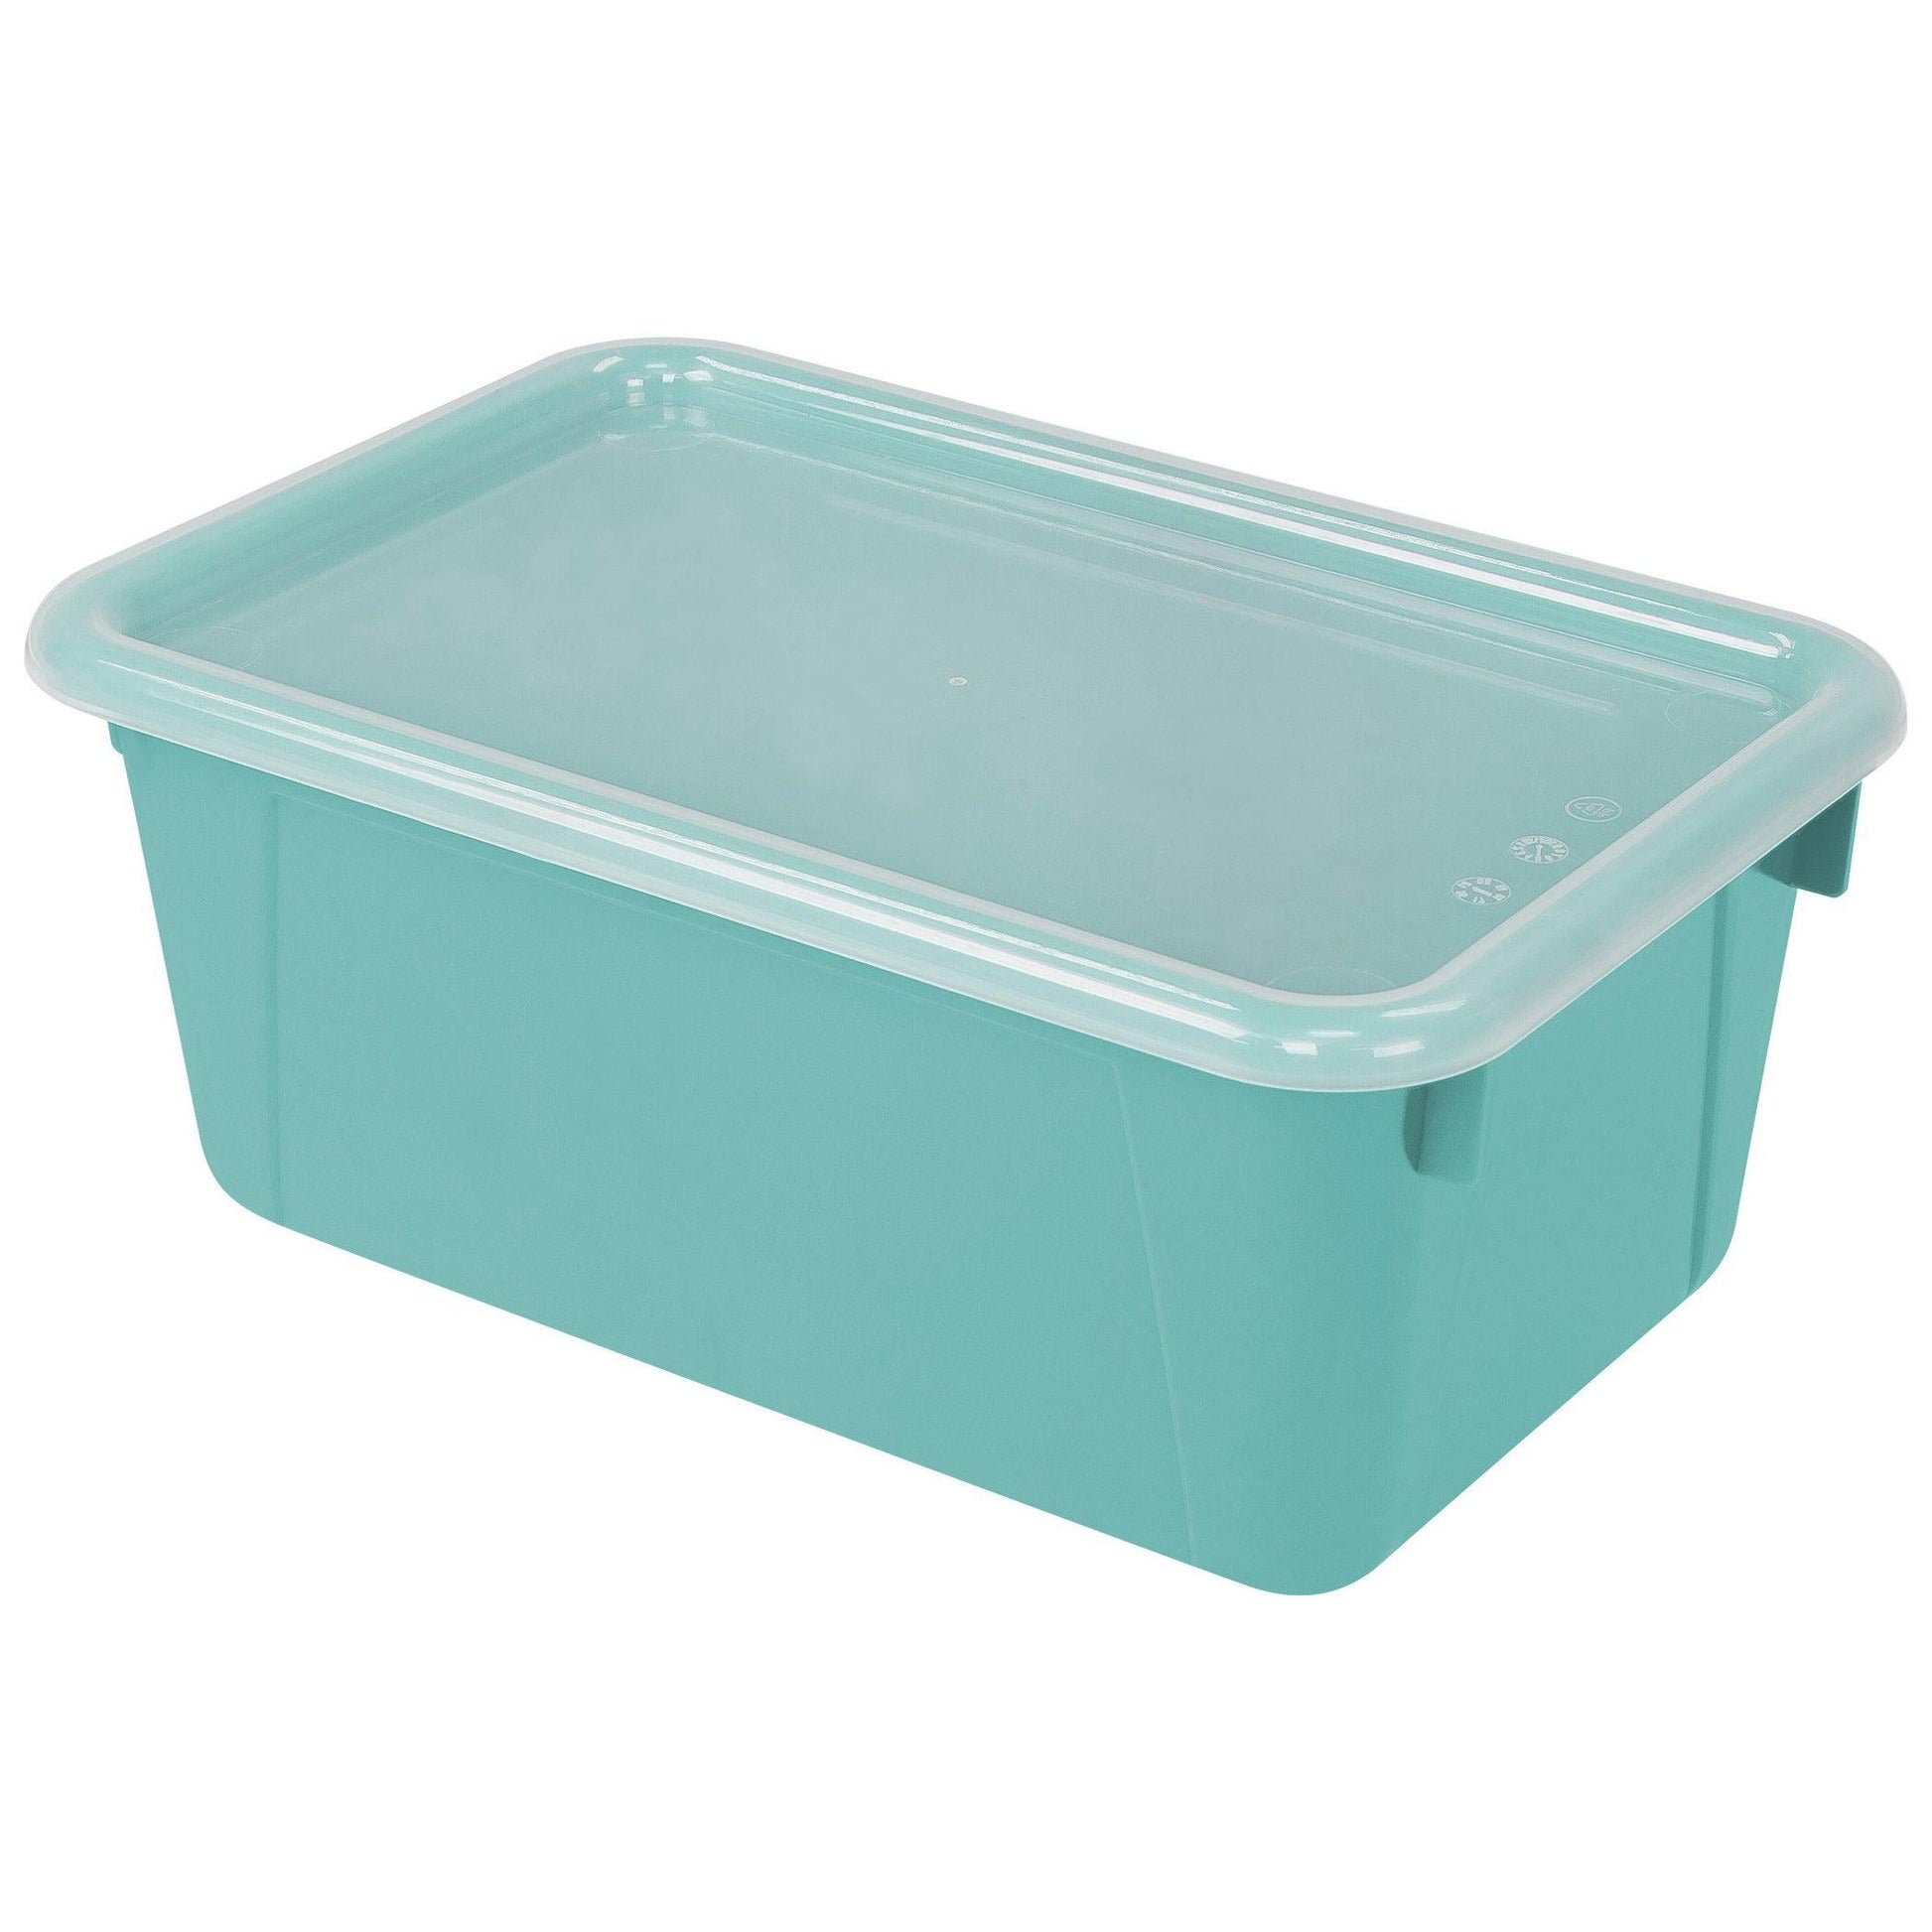 Small Cubby Bin with Cover, Classroom Teal - Loomini